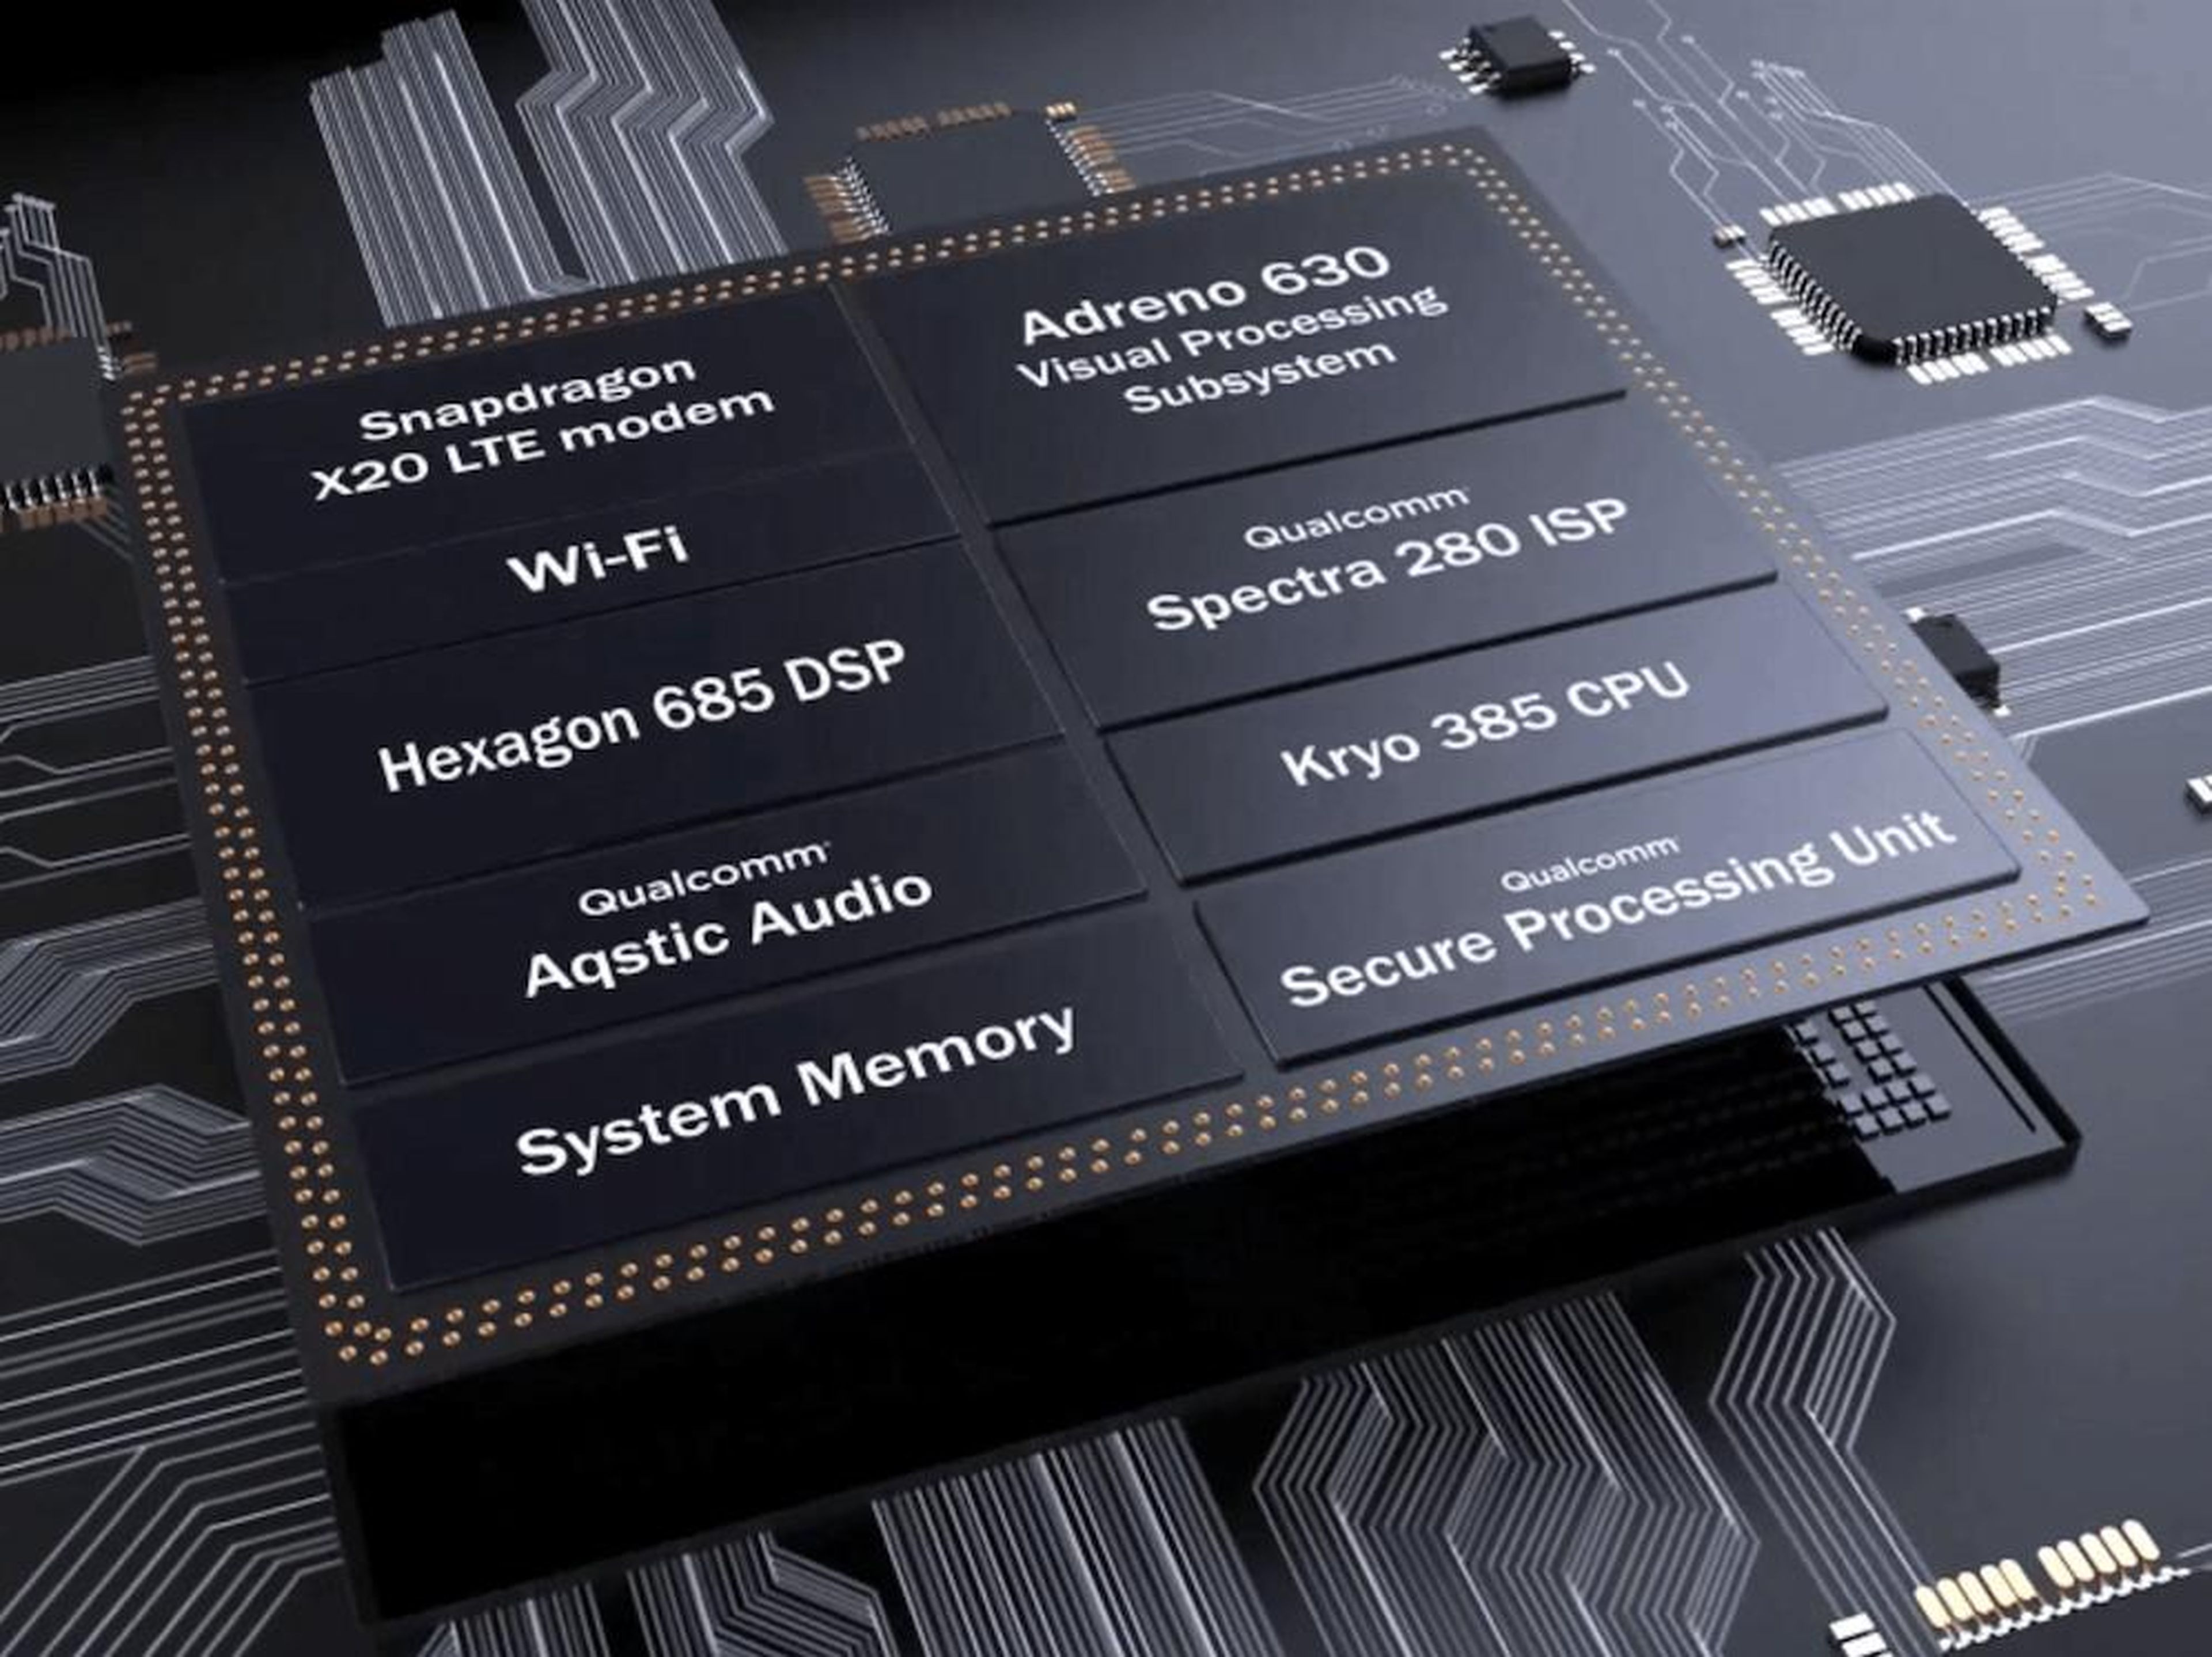 The Qualcomm Snapdragon 845 from current-generation premium Android smartphones.